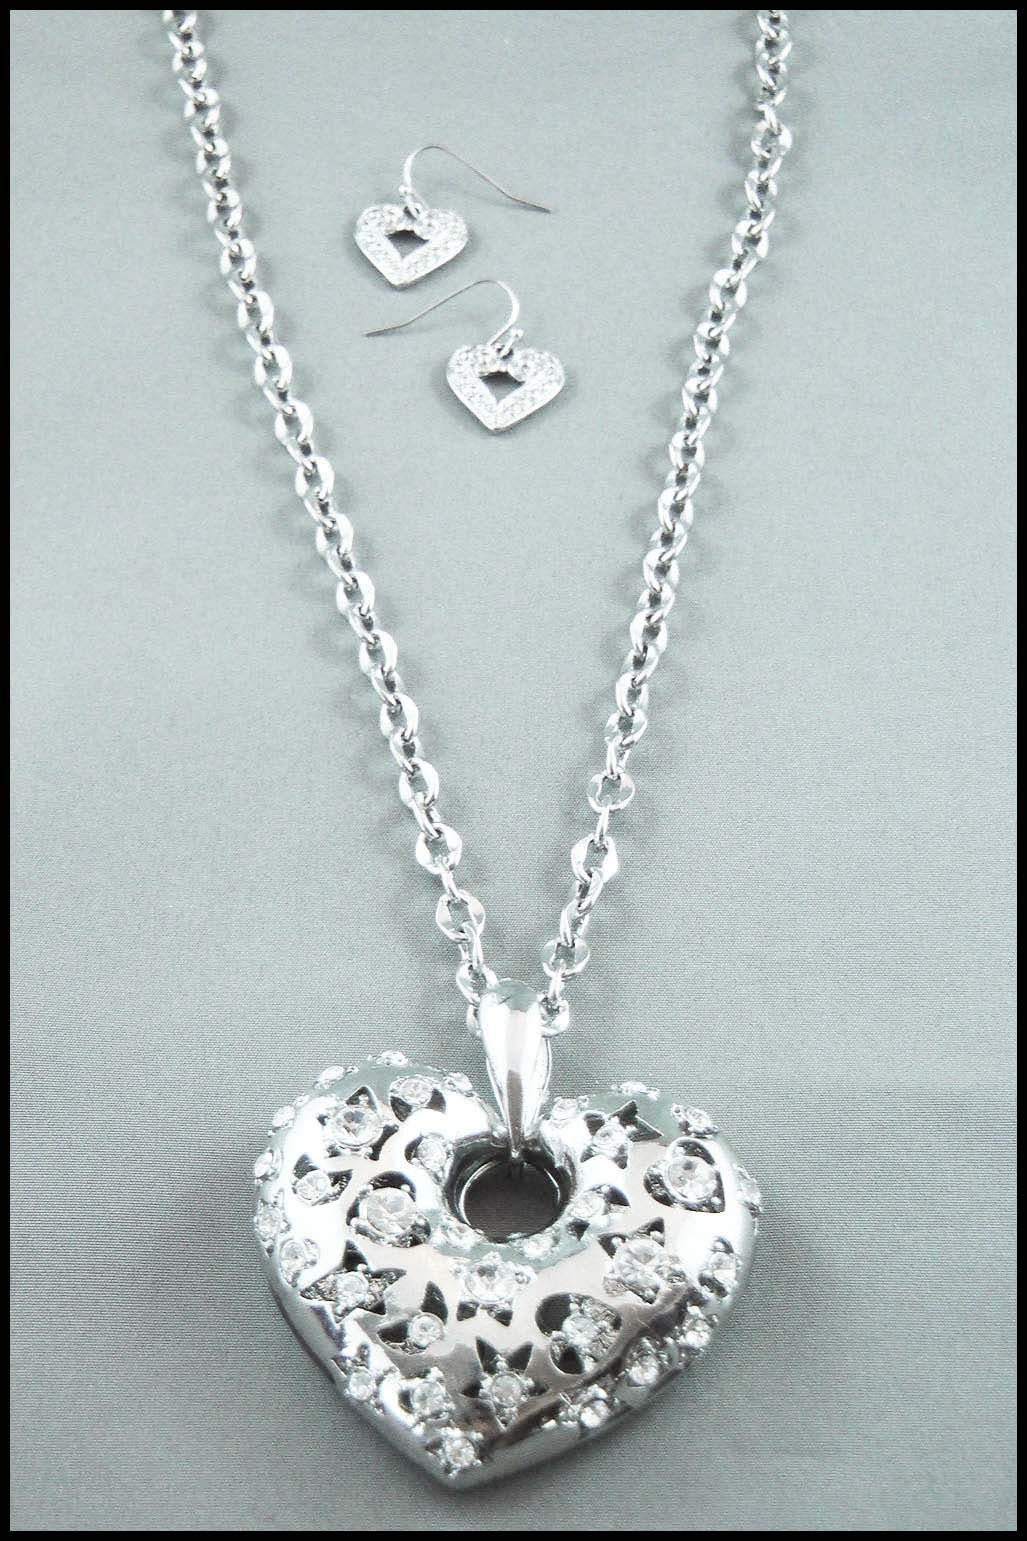 Rhinestone Heart Pendant Necklace and Earring Set